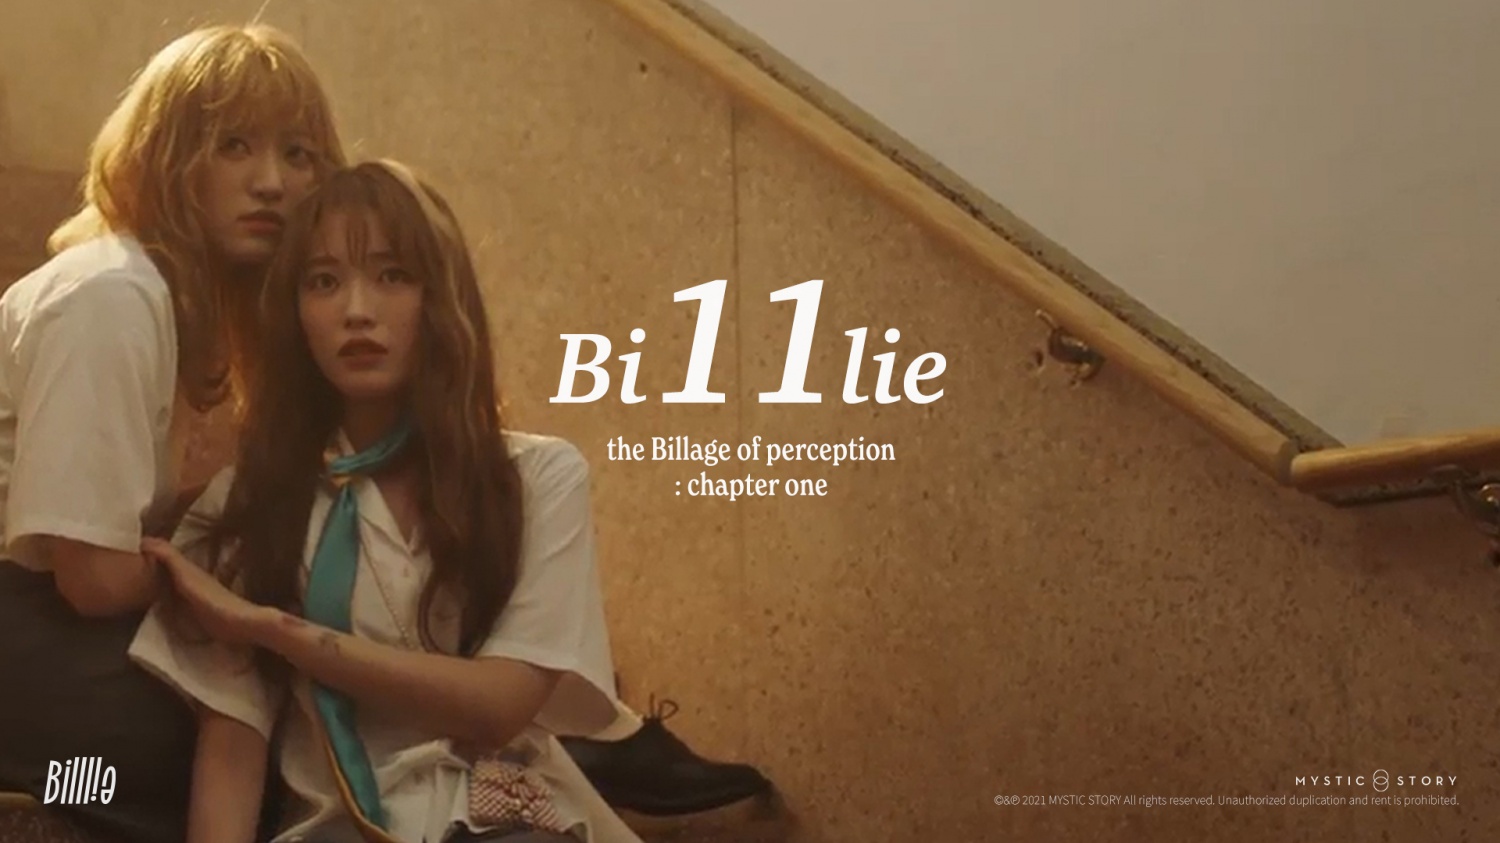 Billlie Releases Debut Album Preview Video... Global producer participation